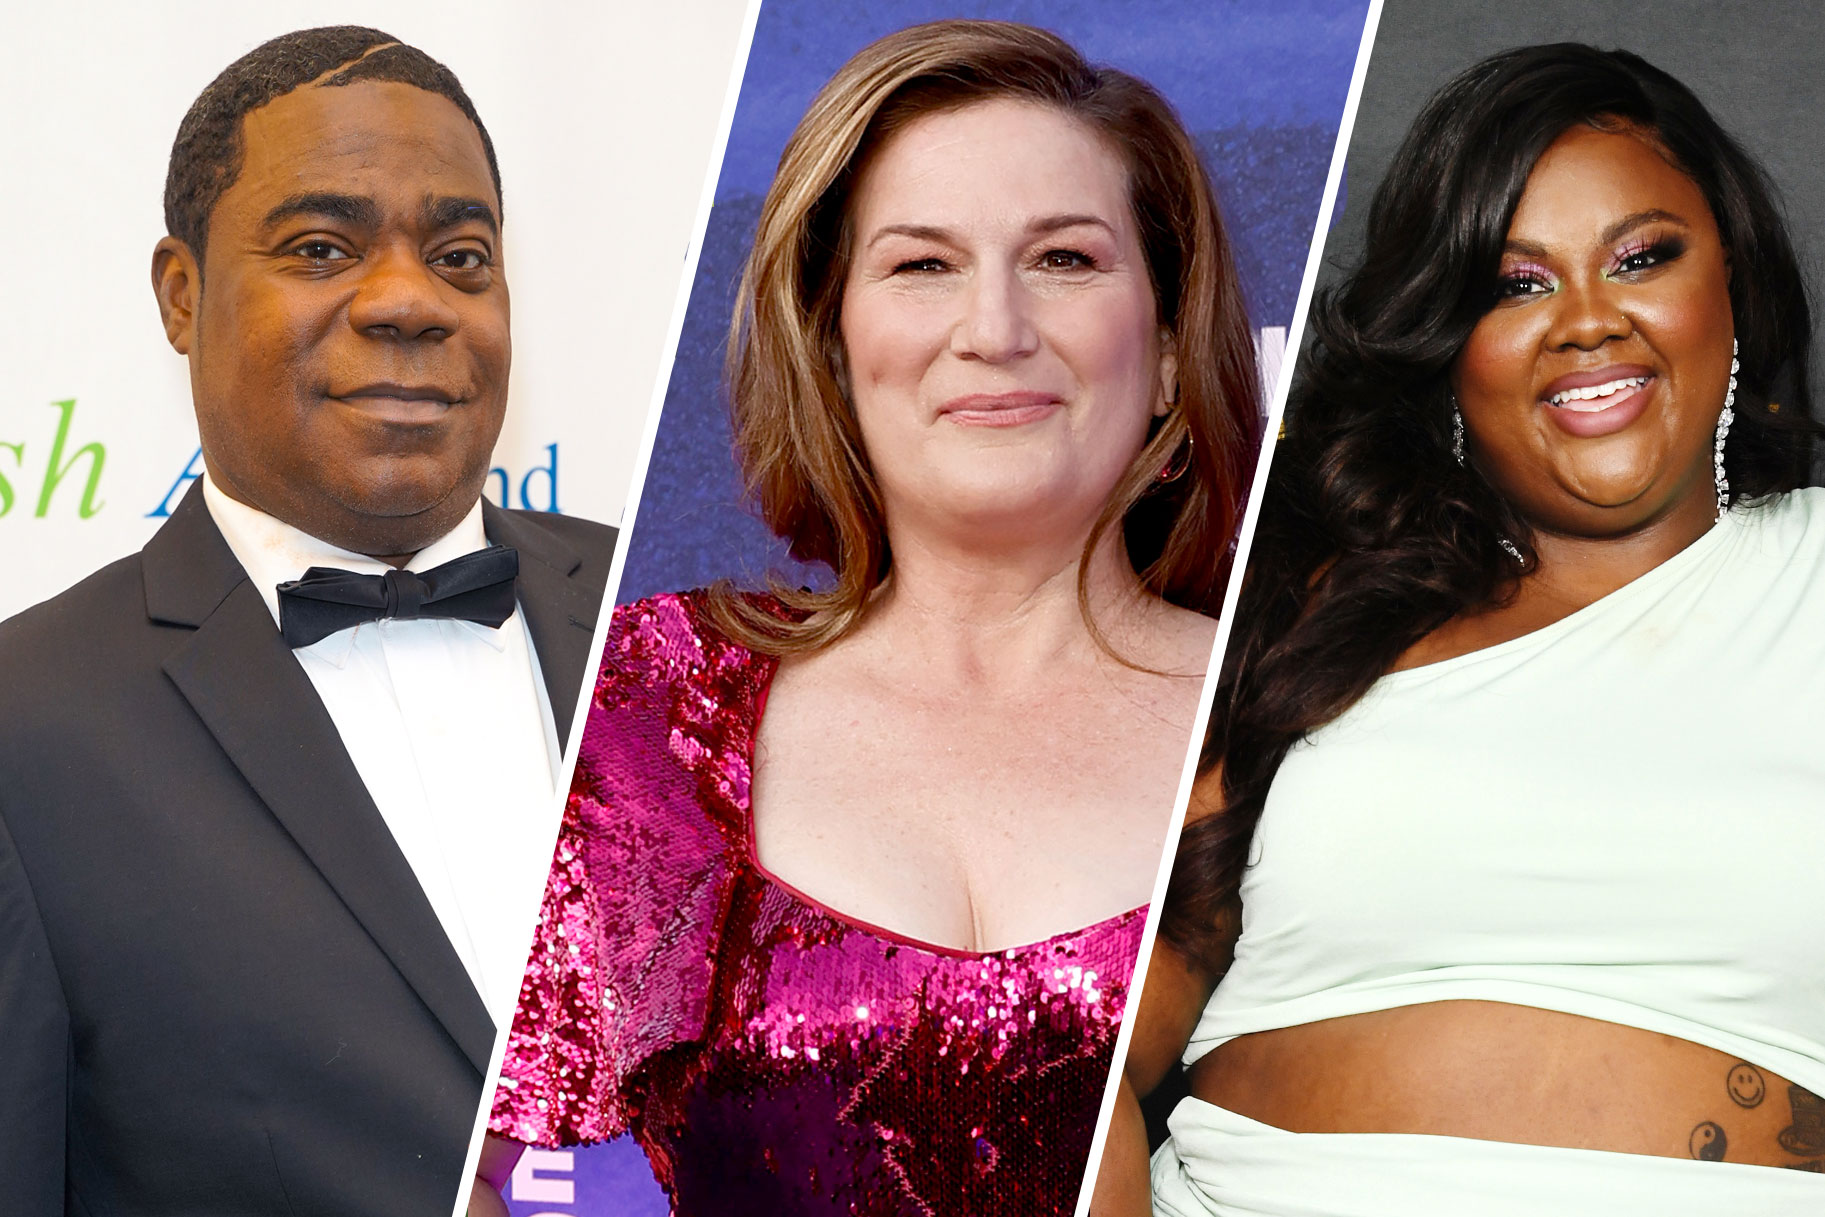 Tracy Morgan, Ana Gasteyer and Nicole Byer will be attending the Golden Globes